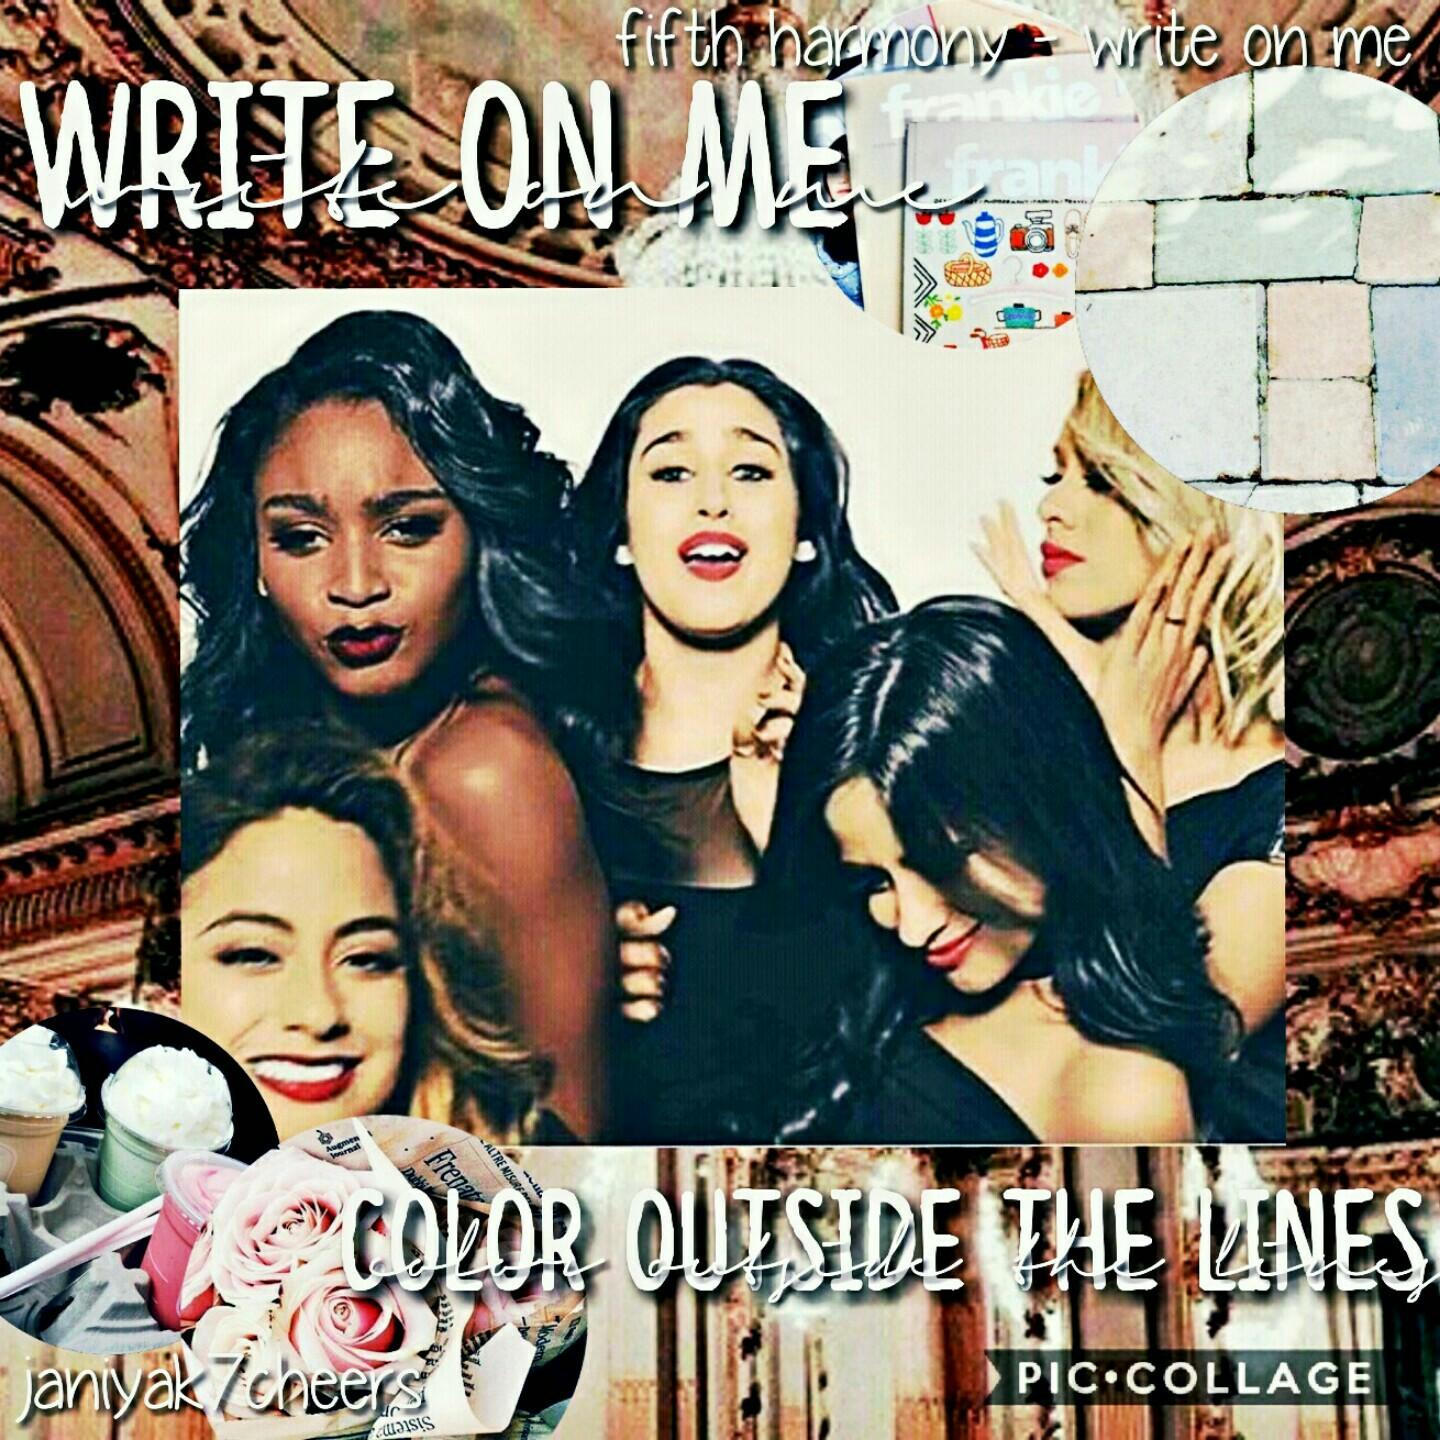 💯🎤 Tap Meh!🎤💯

5th Harmony is bae😍 like seriously I luv them so much😻| I don't really know if I like this maybe I did the wrong colors| anyhoo goodnight internet friends🌉😚❤